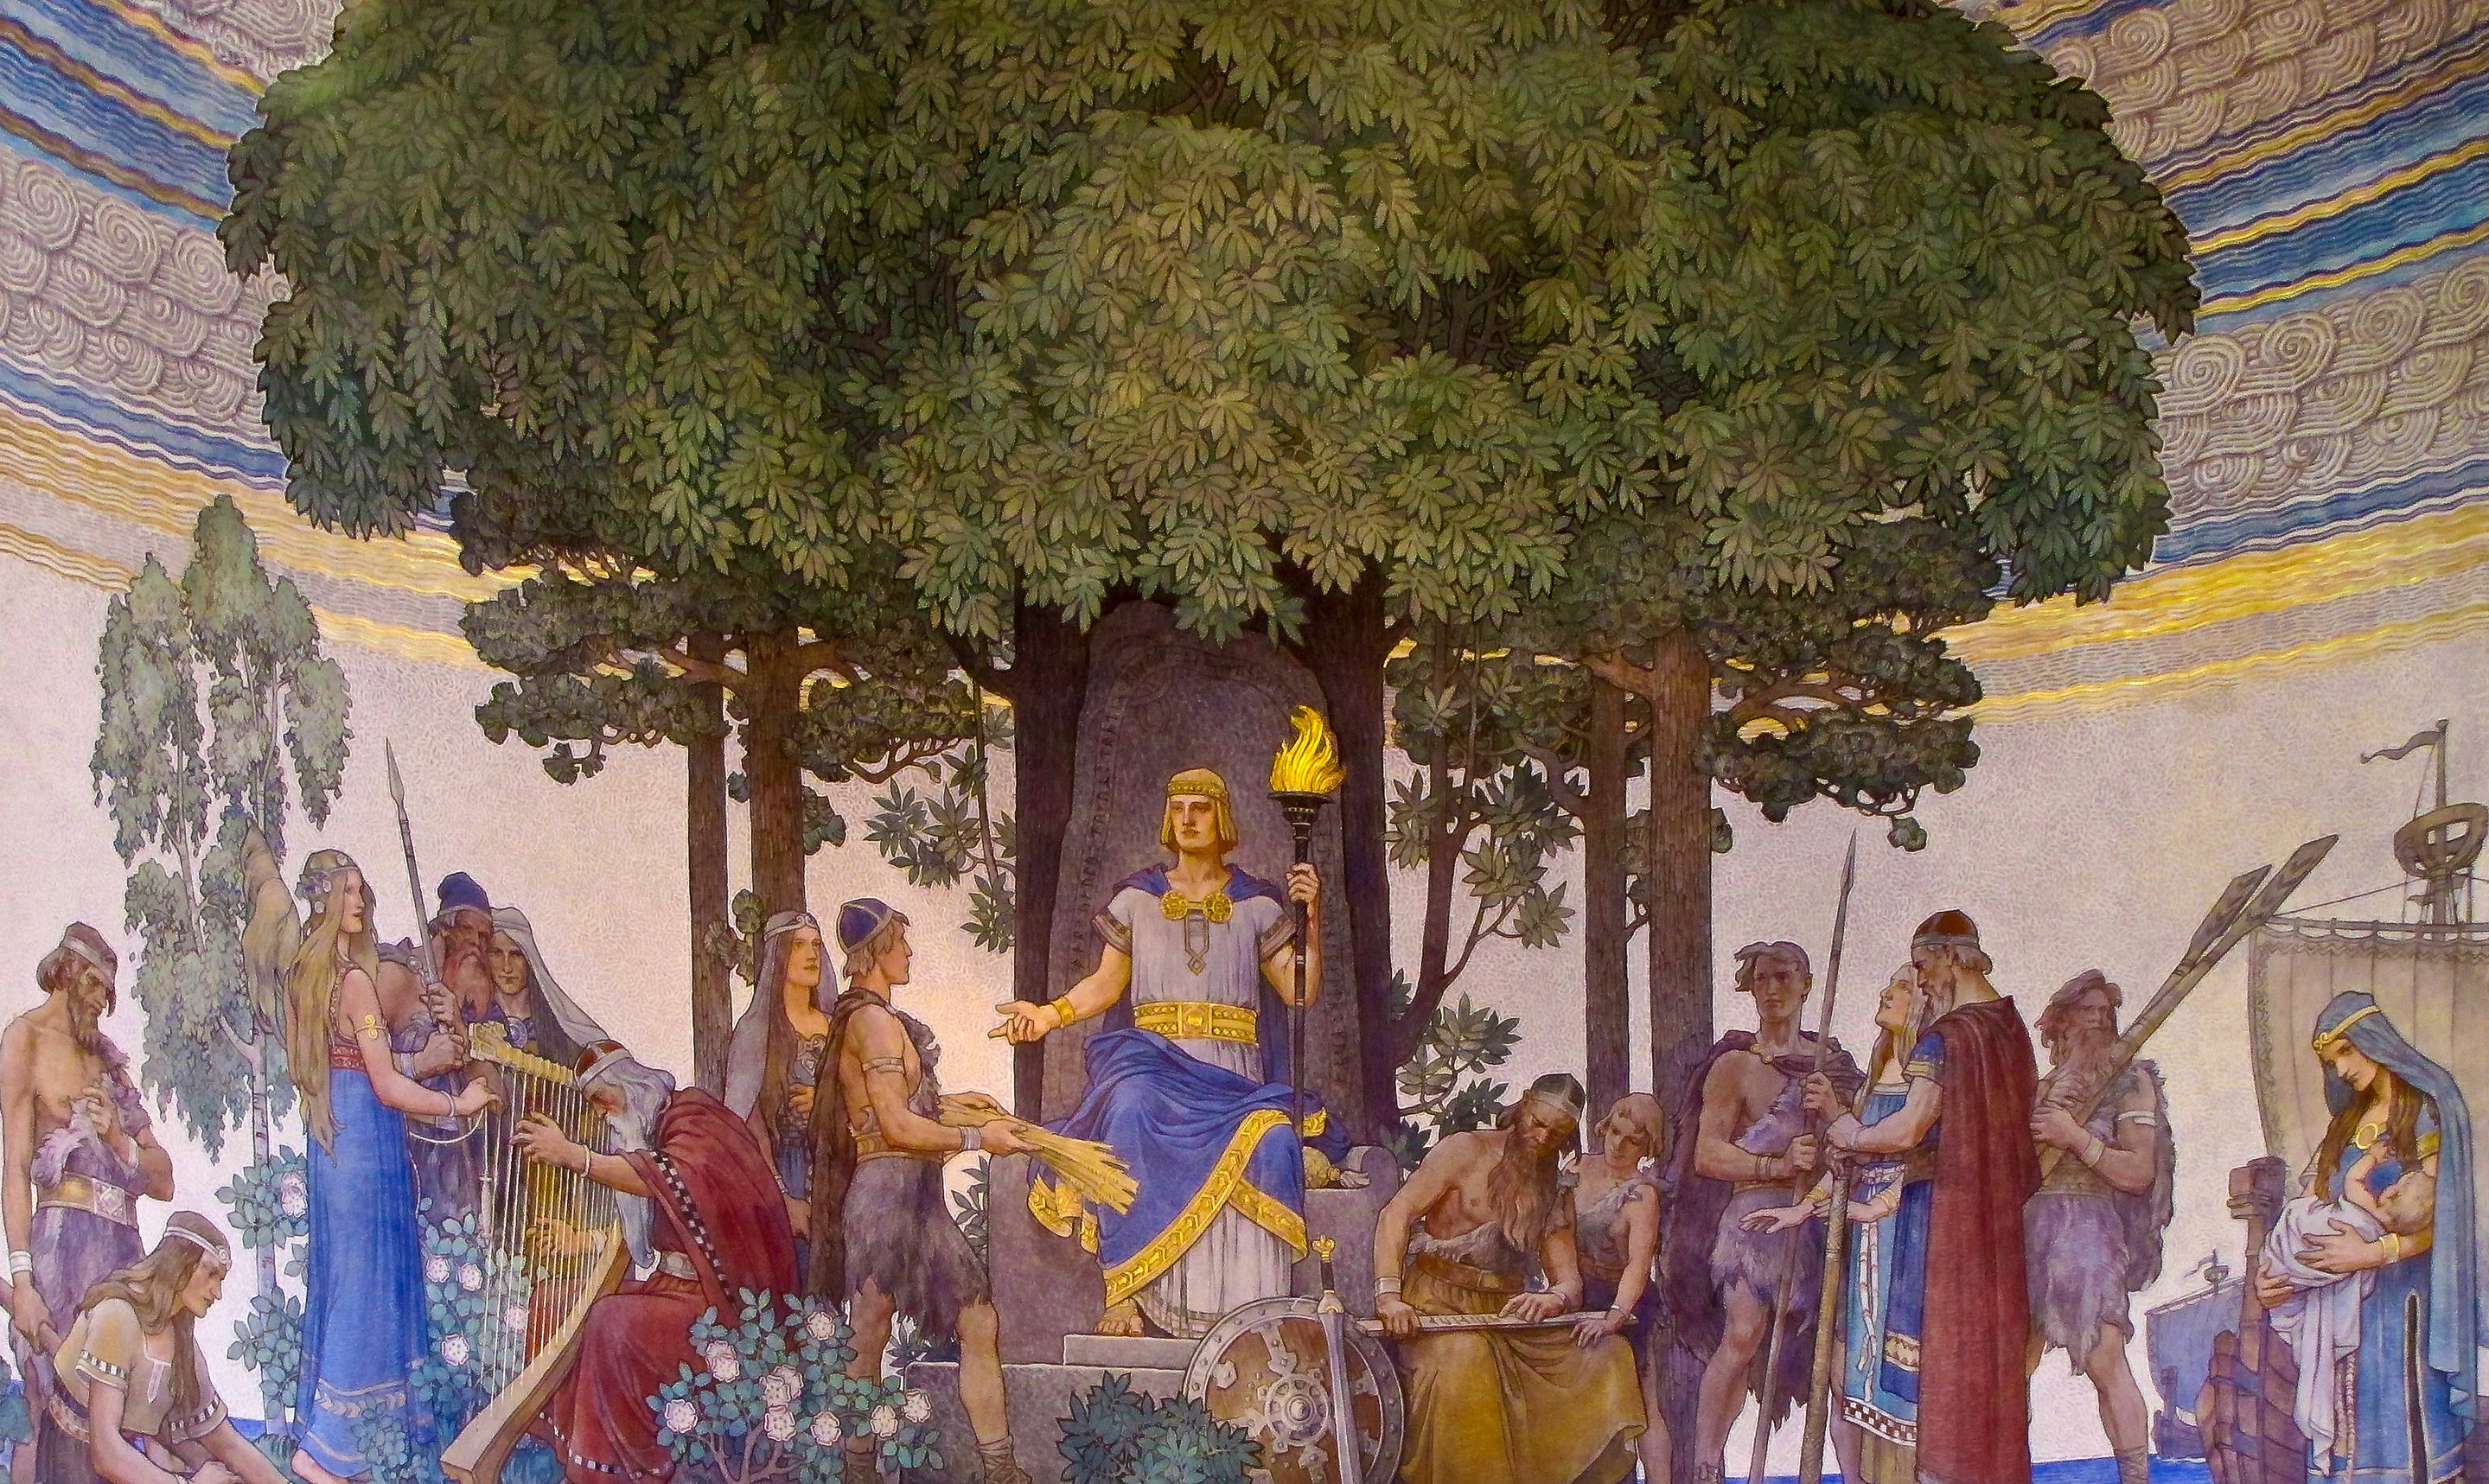 The god Heimdall stands among a group of people with a torch in his hand, framed by a tree in the center of this painting.